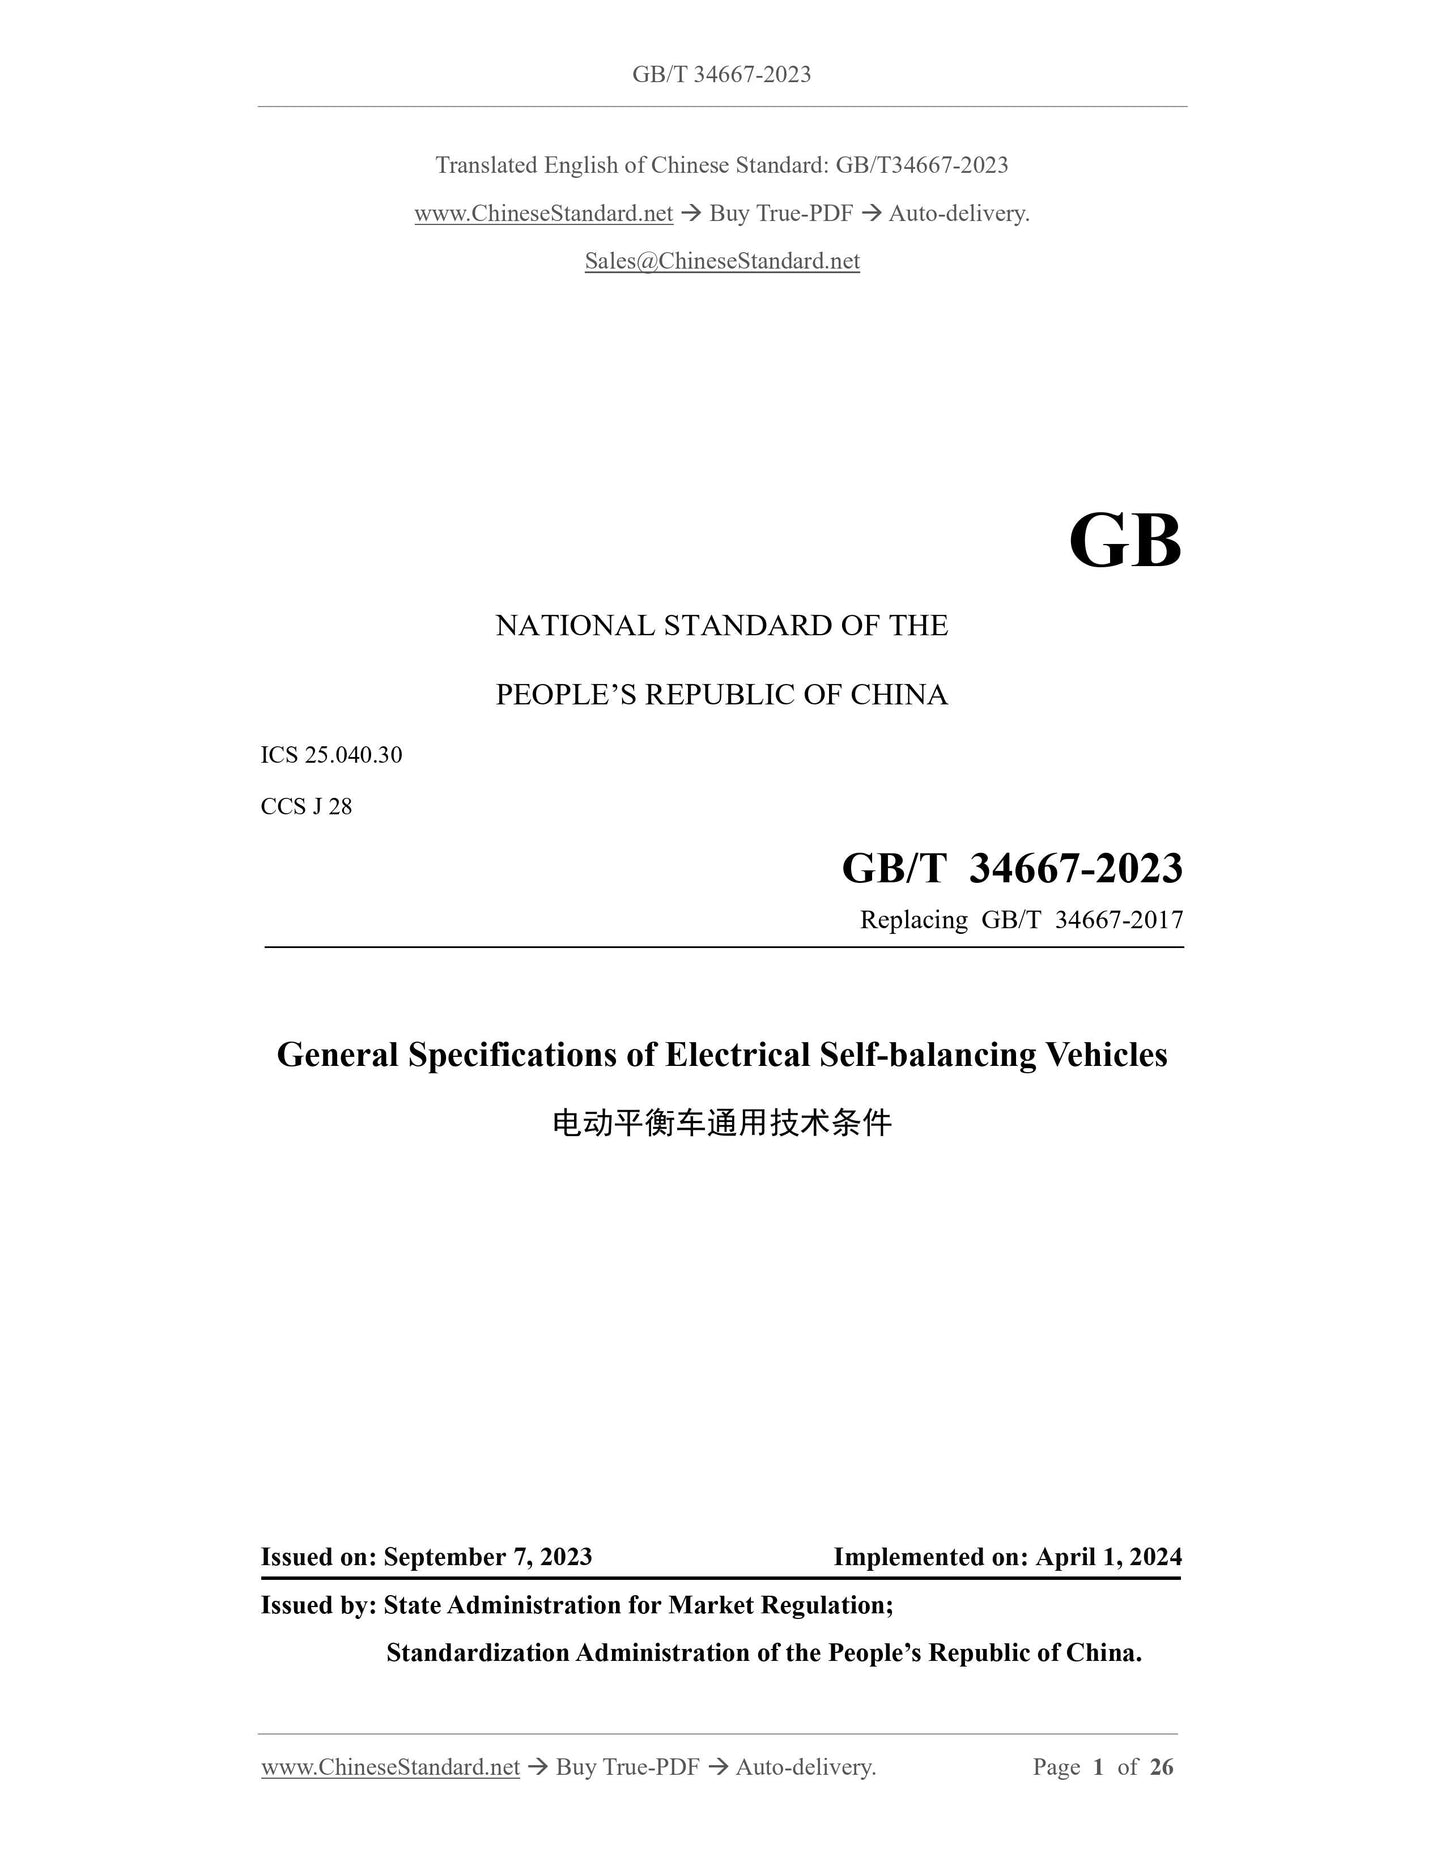 GB/T 34667-2023 Page 1